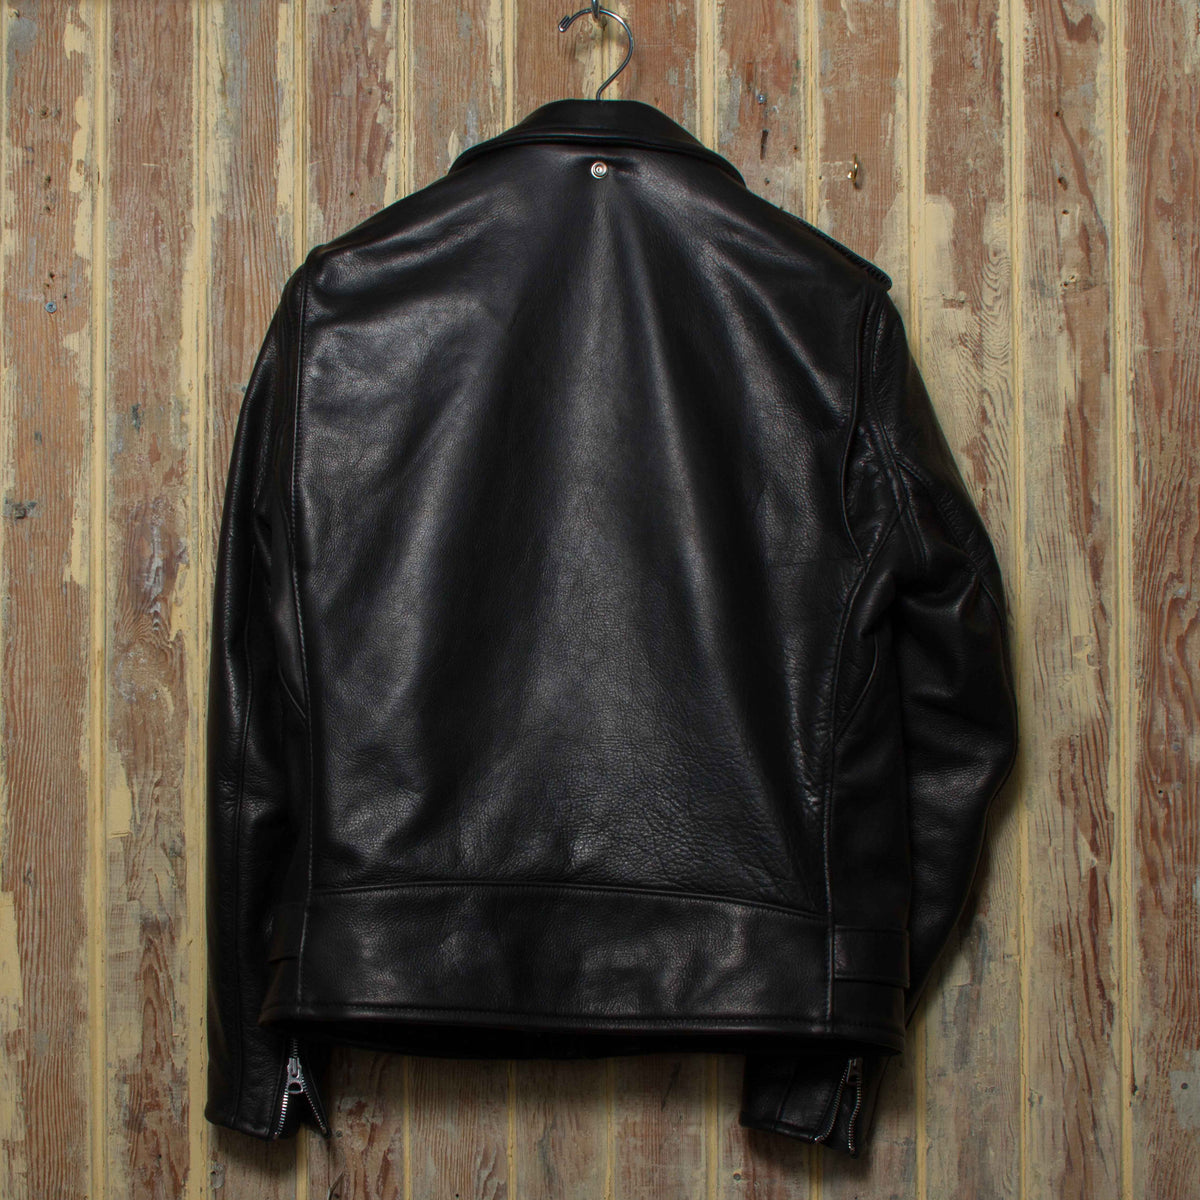 The Shop Vancouver Schott NYC Dealer Canada One Star 519 Leather Motorcycle Jacket Premium Motorcycle Culture Mens Clothing 